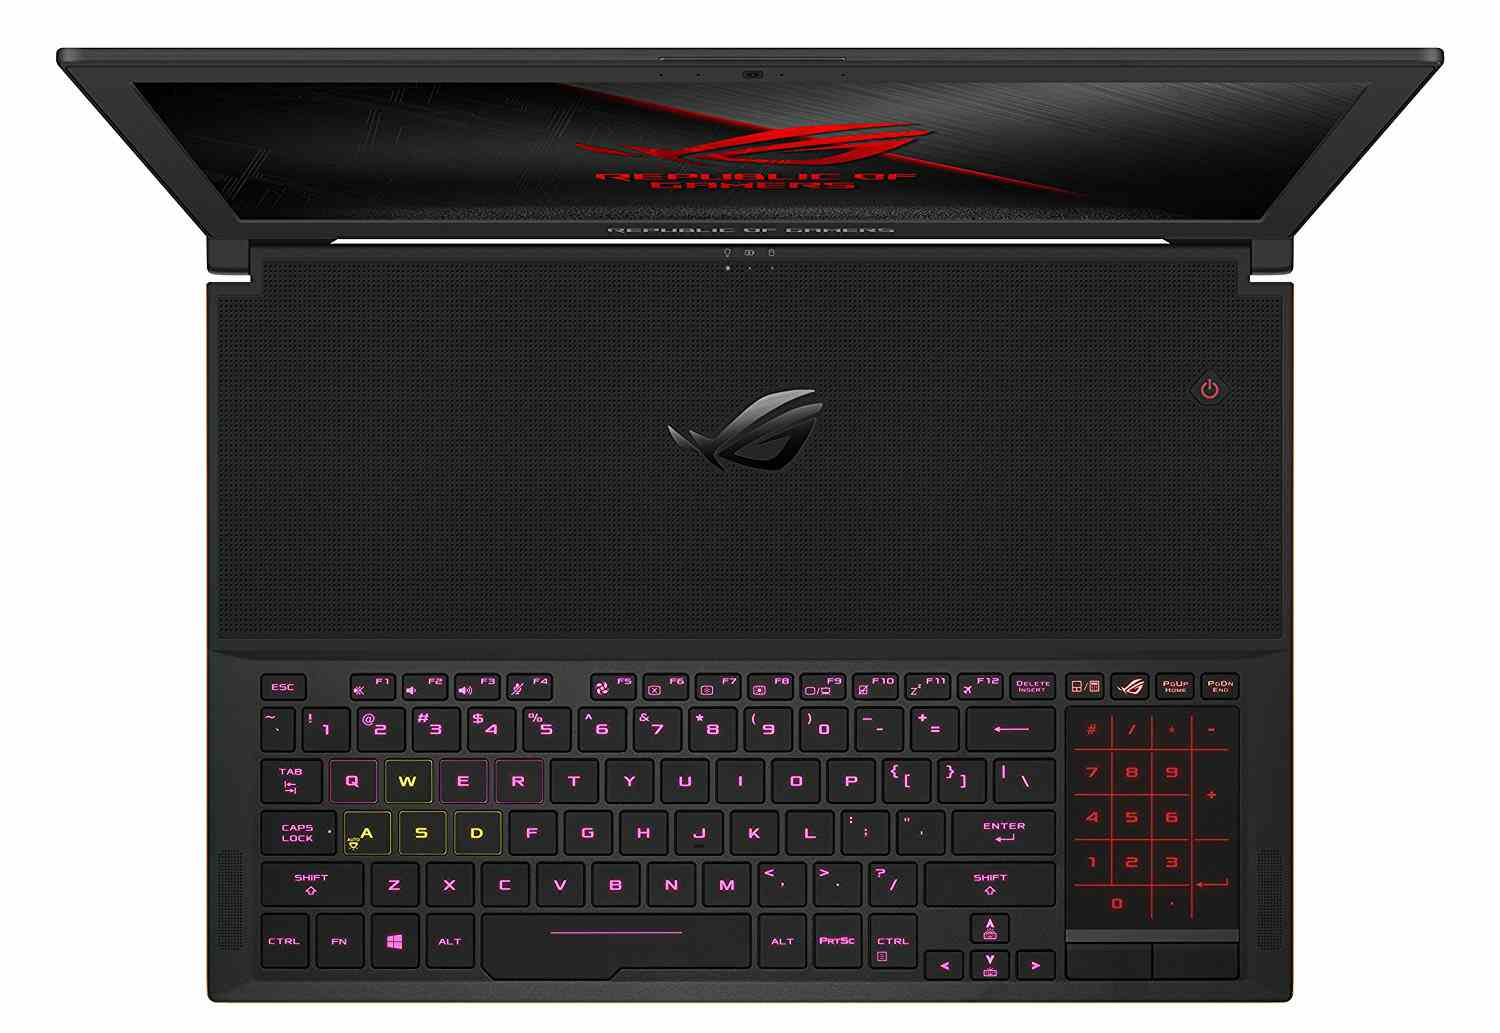 Asus ROG Zephyrus GX501 specifications